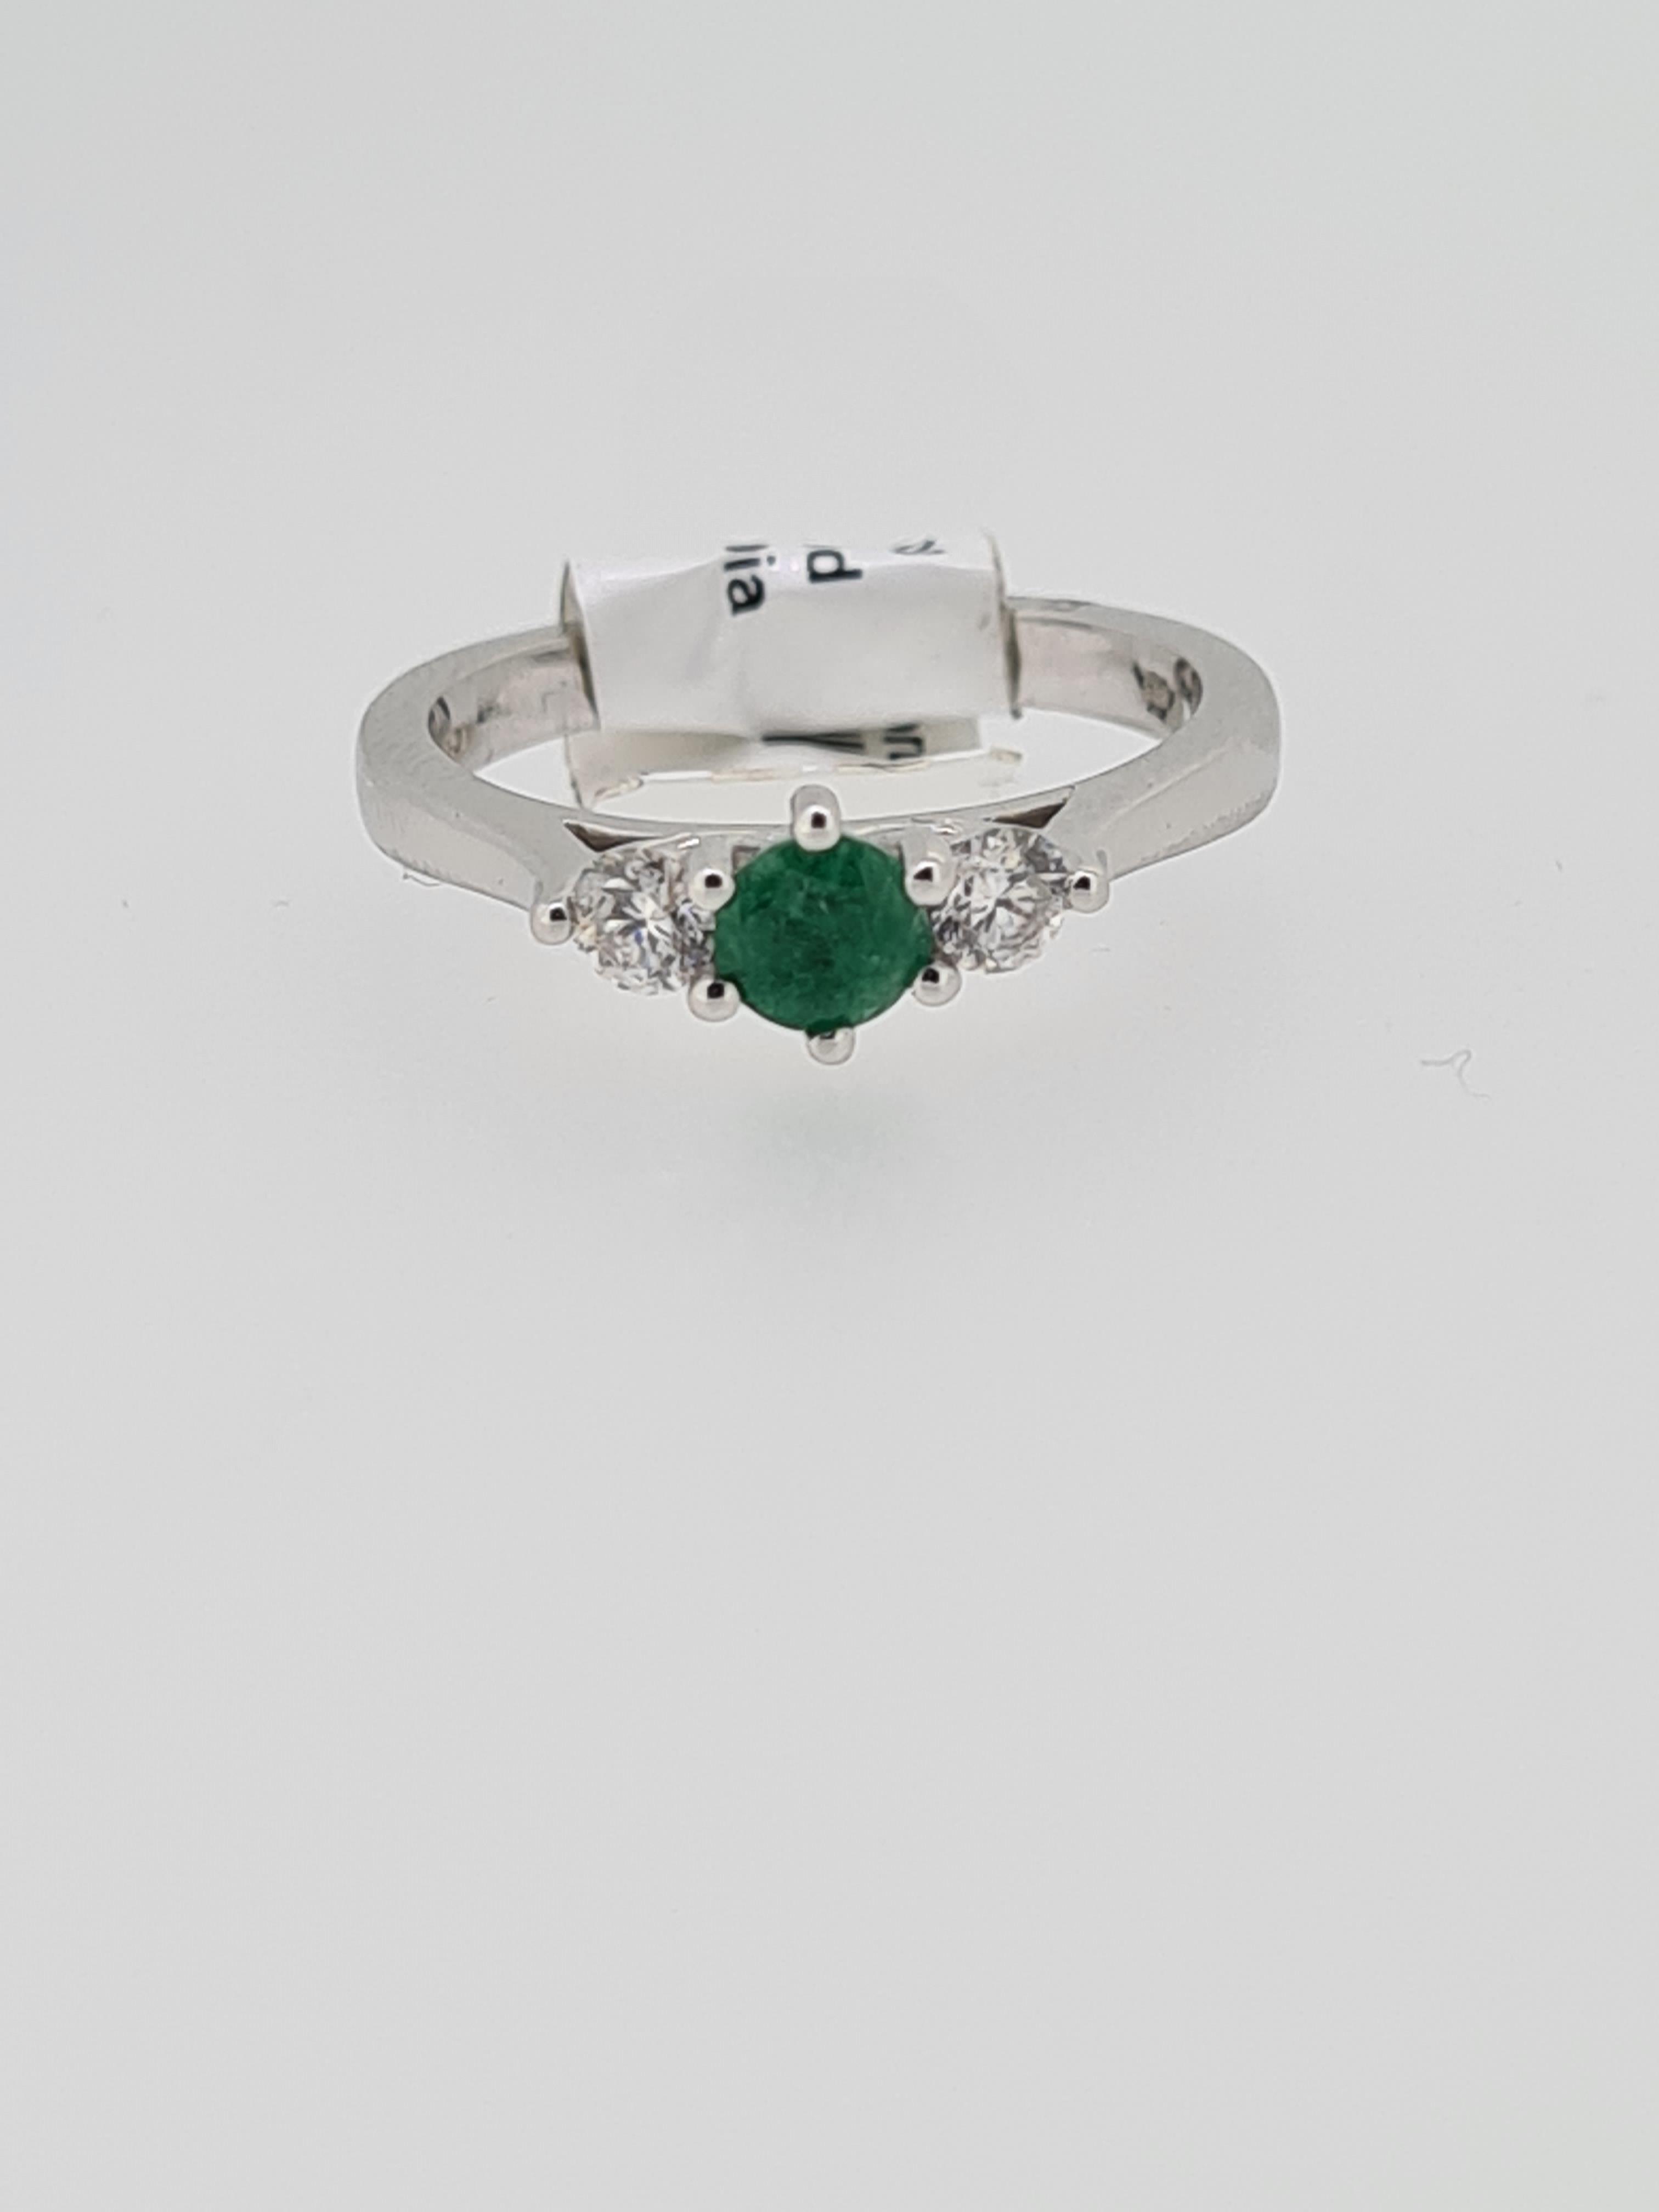 9ct white gold emerald and diamond ring - Image 4 of 4